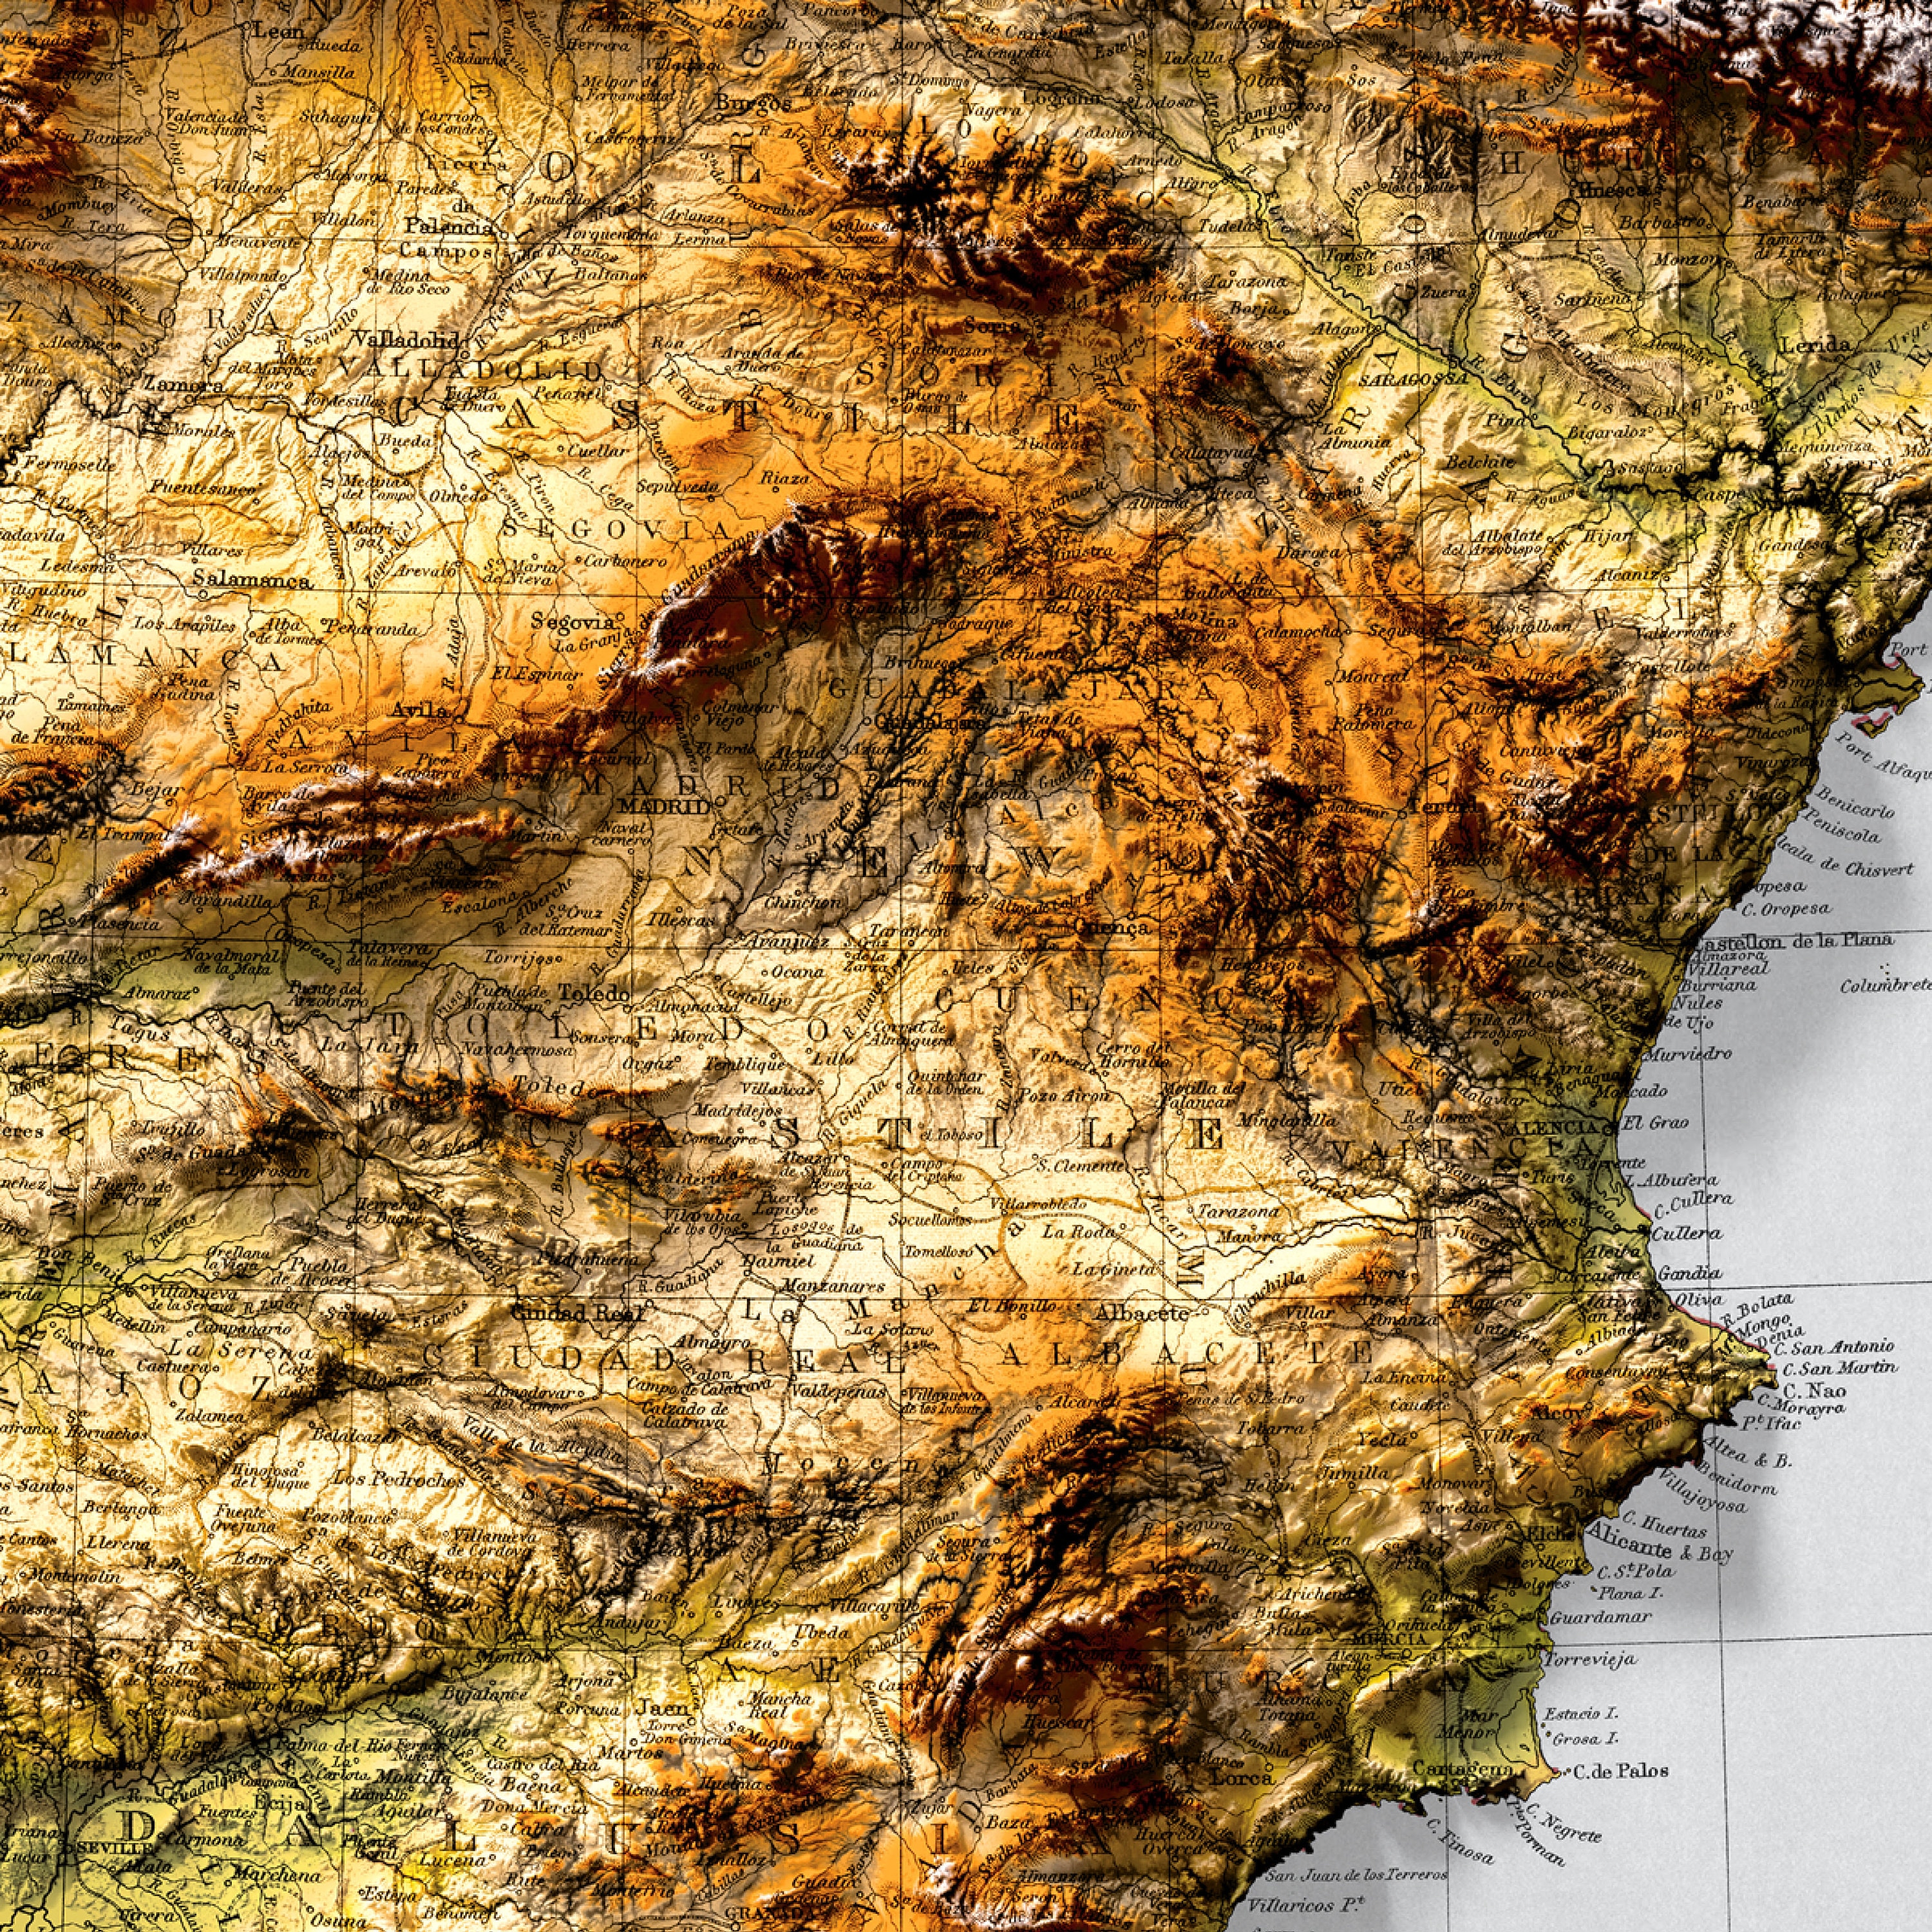 6,029 Spain Portugal Map Images, Stock Photos, 3D objects